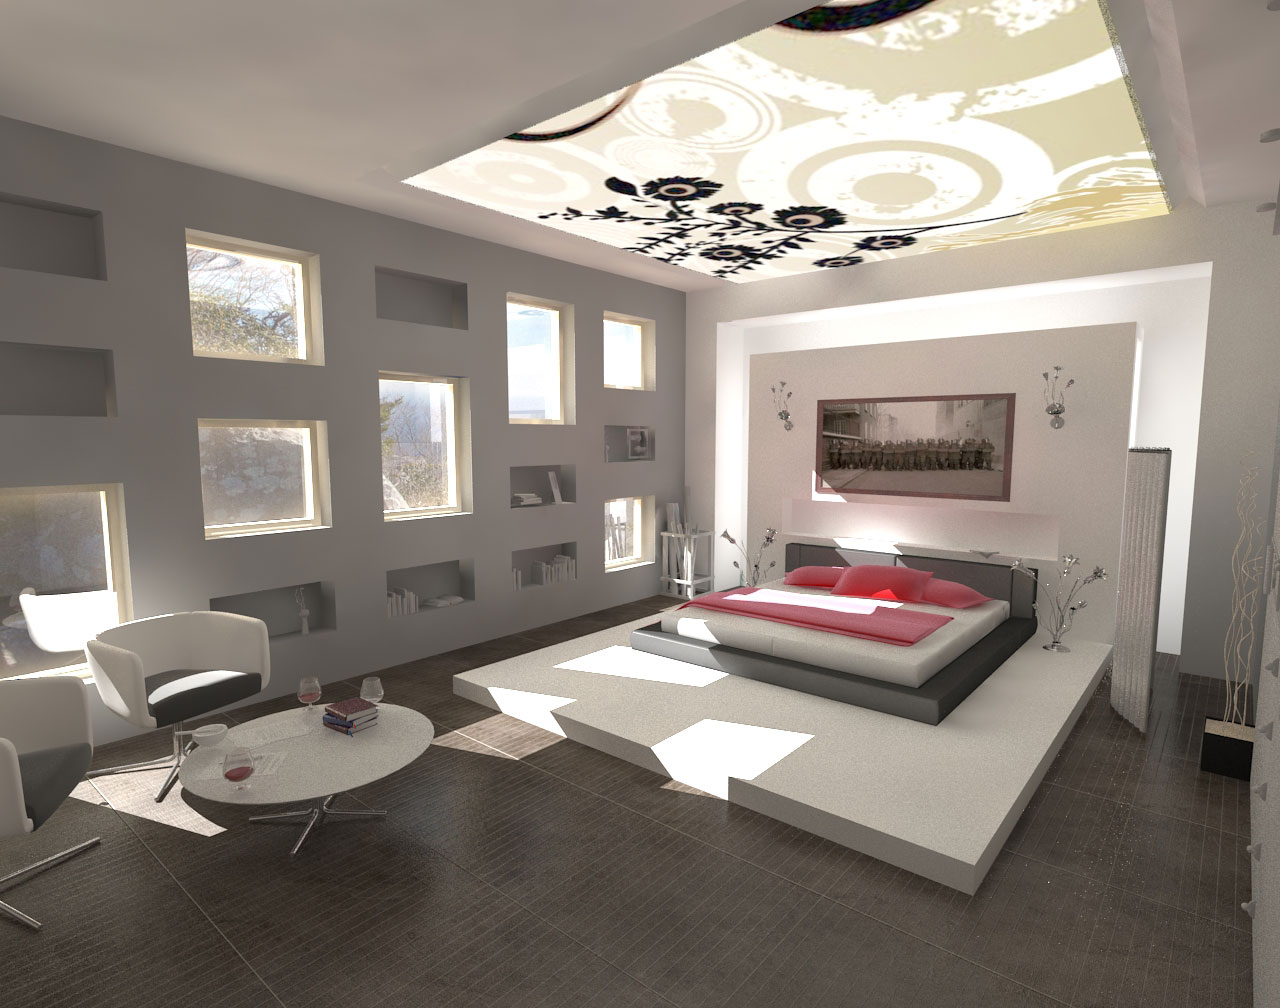 Modern Bedroom With Outstanding Modern Bedroom Design Ideas With White King Bed On Grey Platform Furnished With Decorations On Side Bed Also Completed With Oval Table And Chairs Bedroom 15 Charming Bedroom Design Ideas For Beautiful Hillside Homes